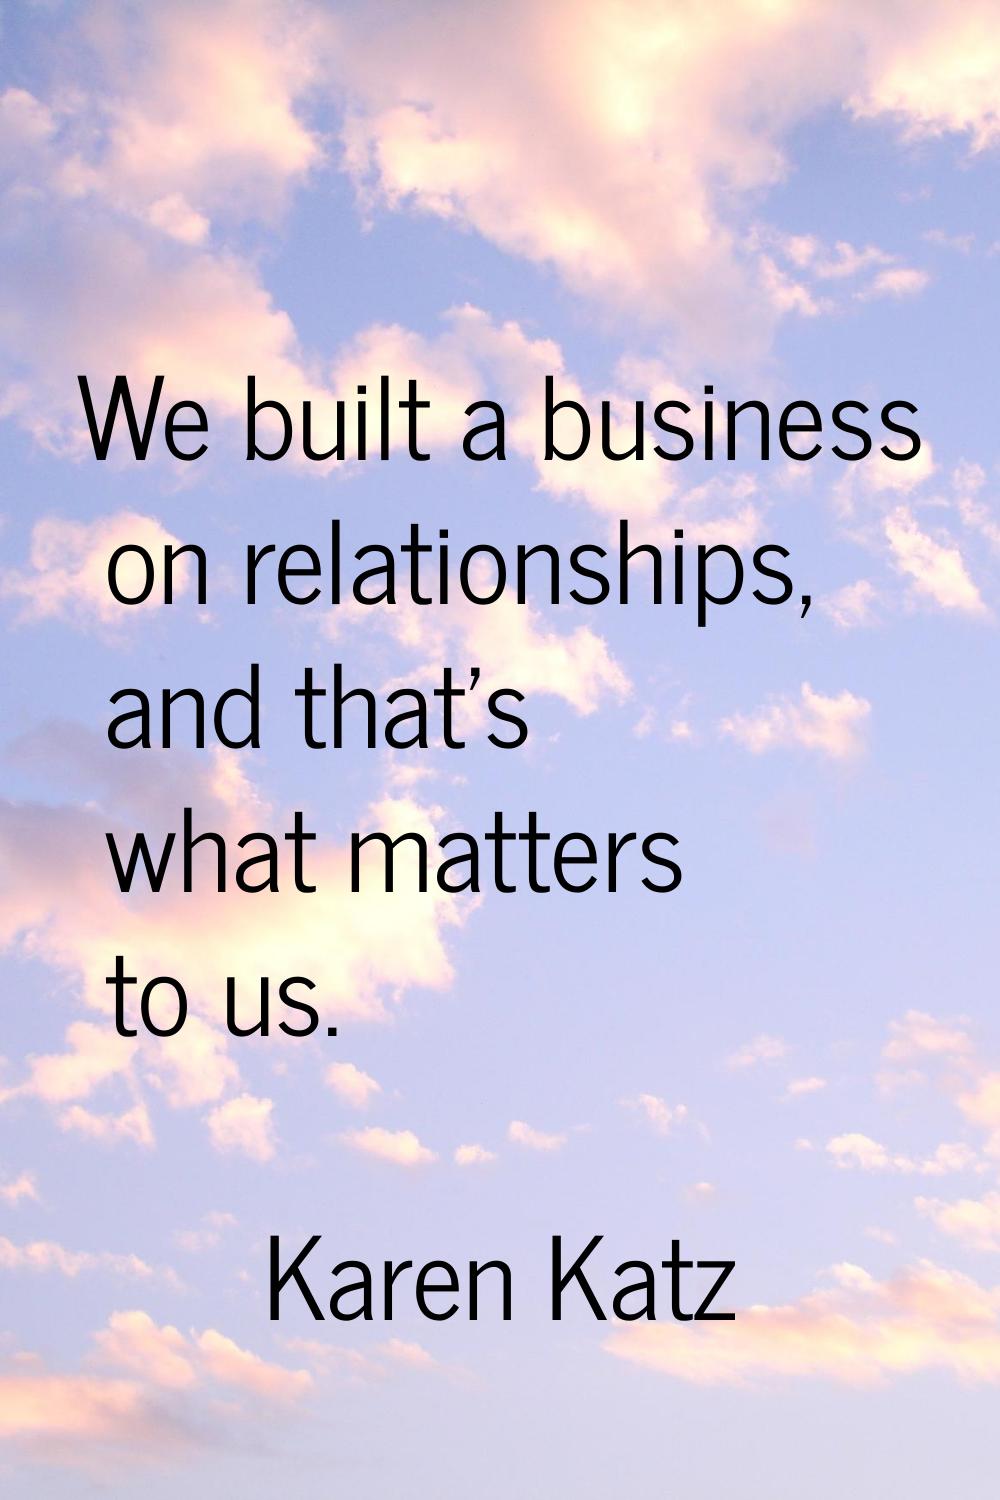 We built a business on relationships, and that's what matters to us.